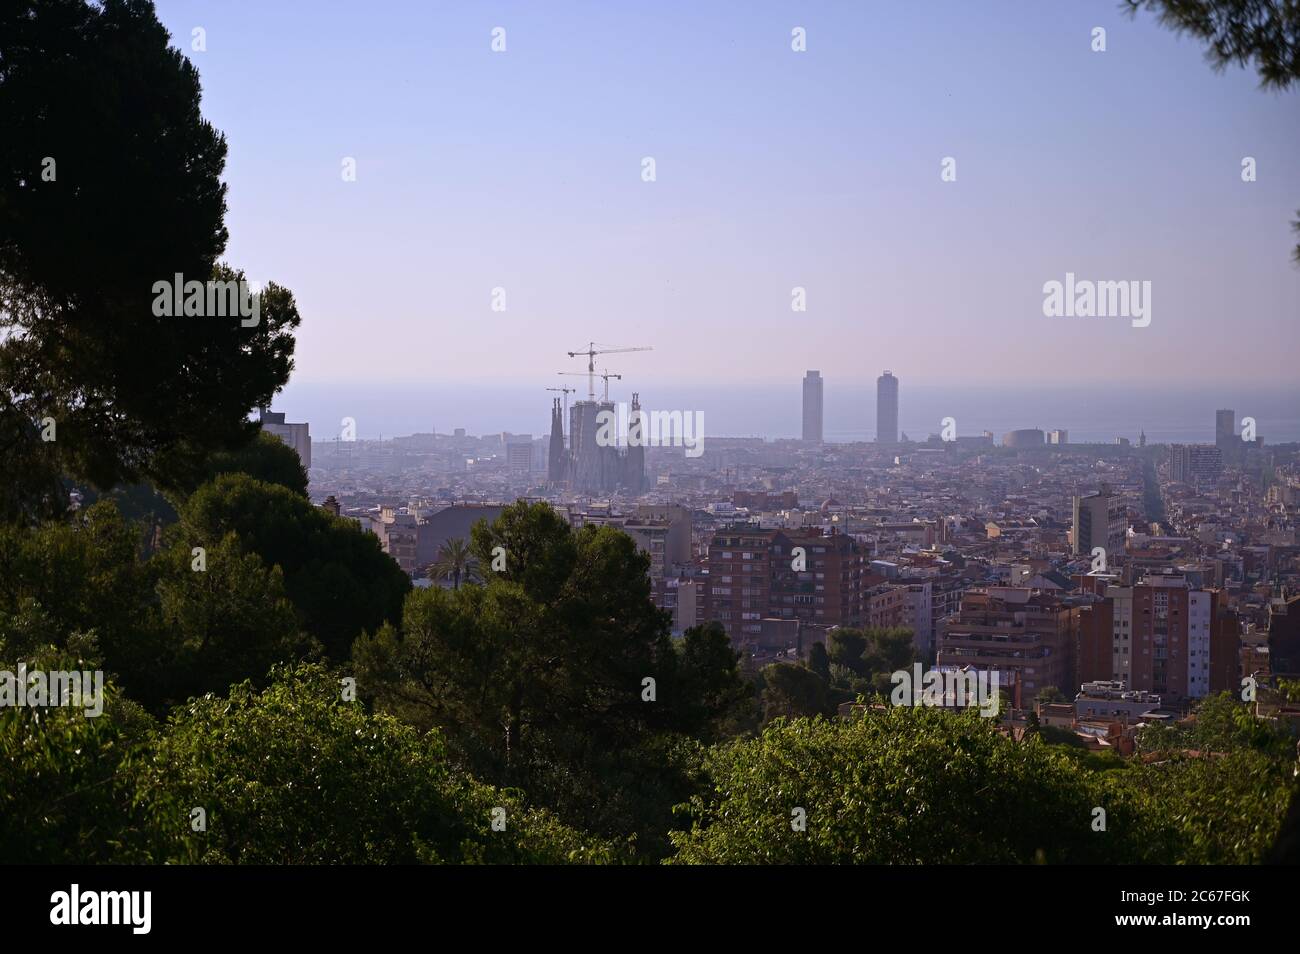 An aerial view of Barcelona, Spain on a clear day. Stock Photo